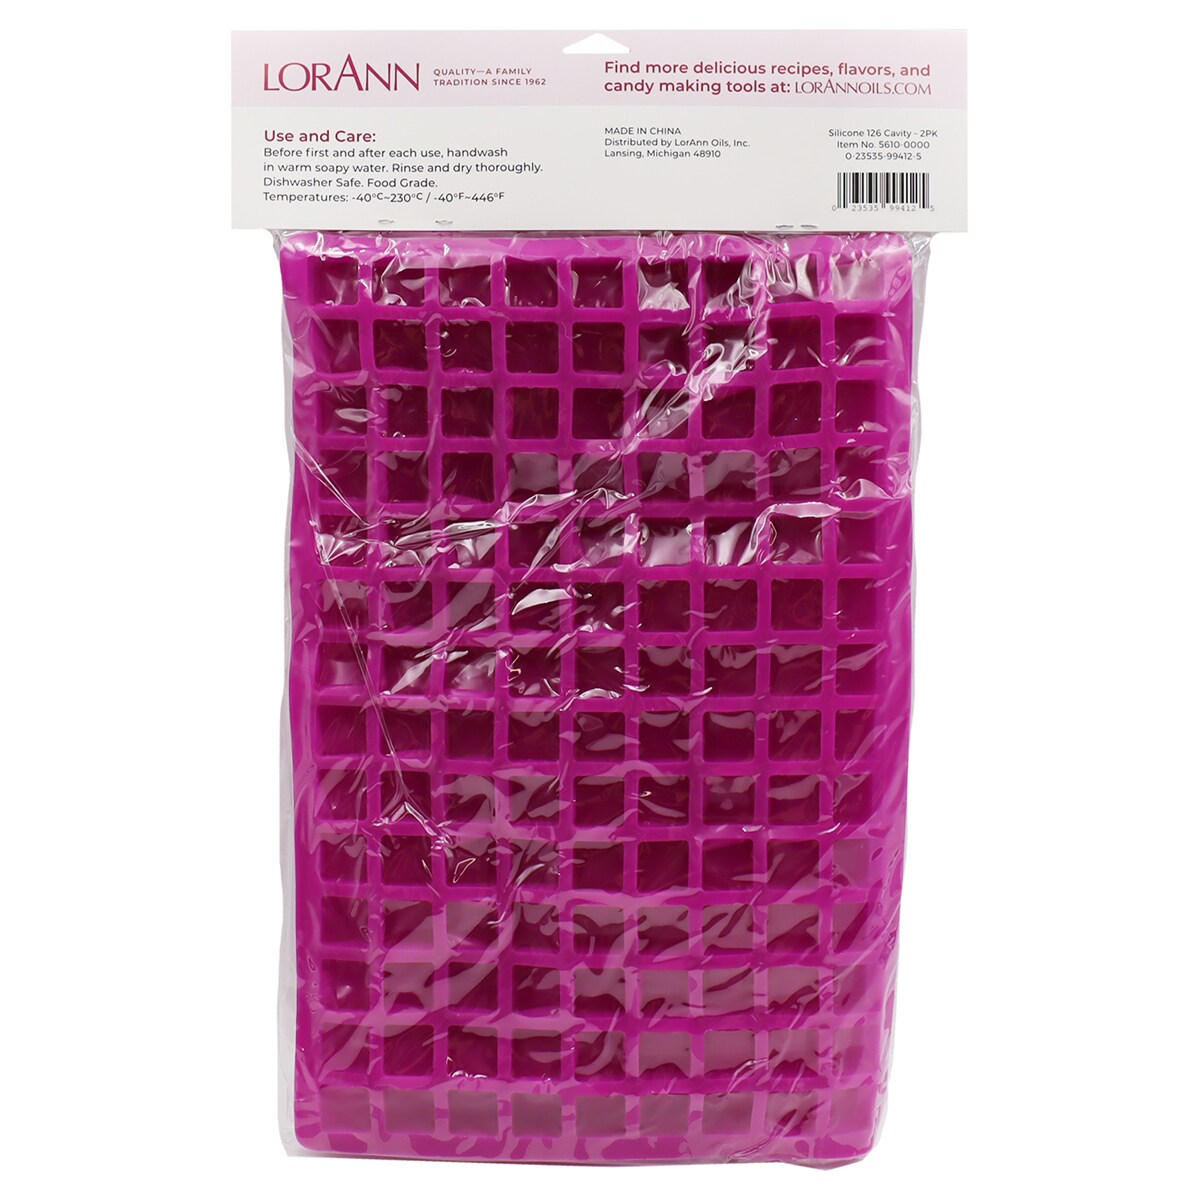 SILICONE GUMMY Square Cube Molds, 2-pack by Lorann, Candy Making Supplies 